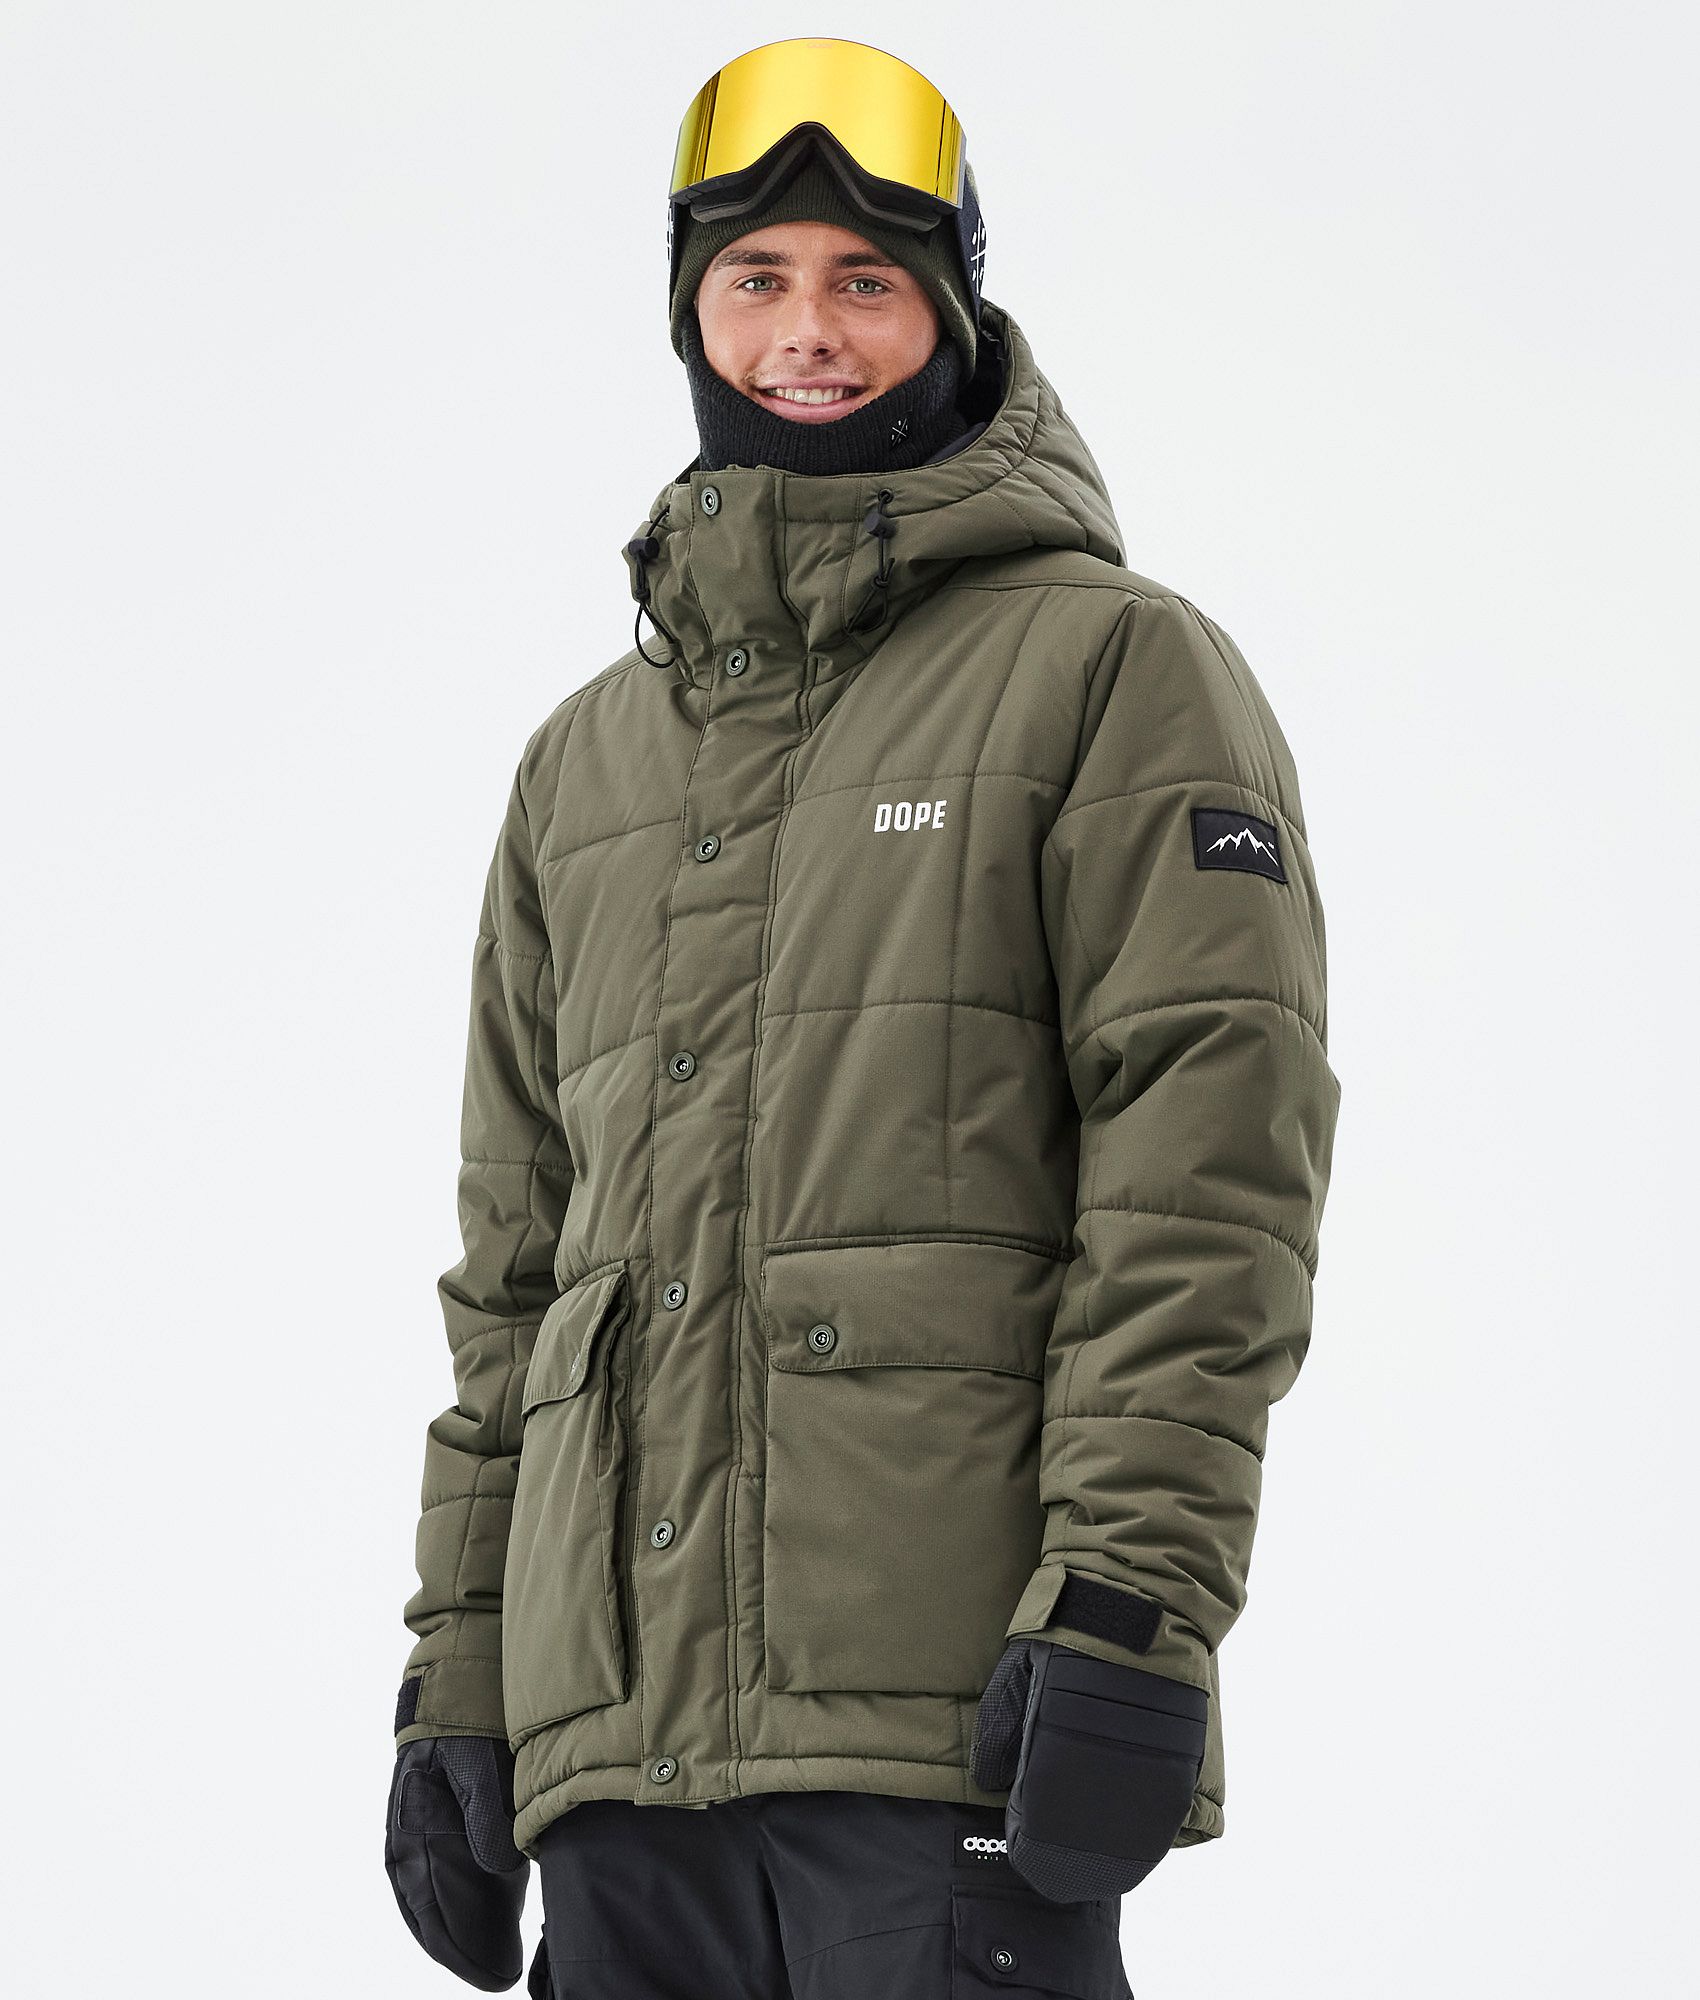 Mens Winter Jackets | Insulated Jackets | New Forest Clothing